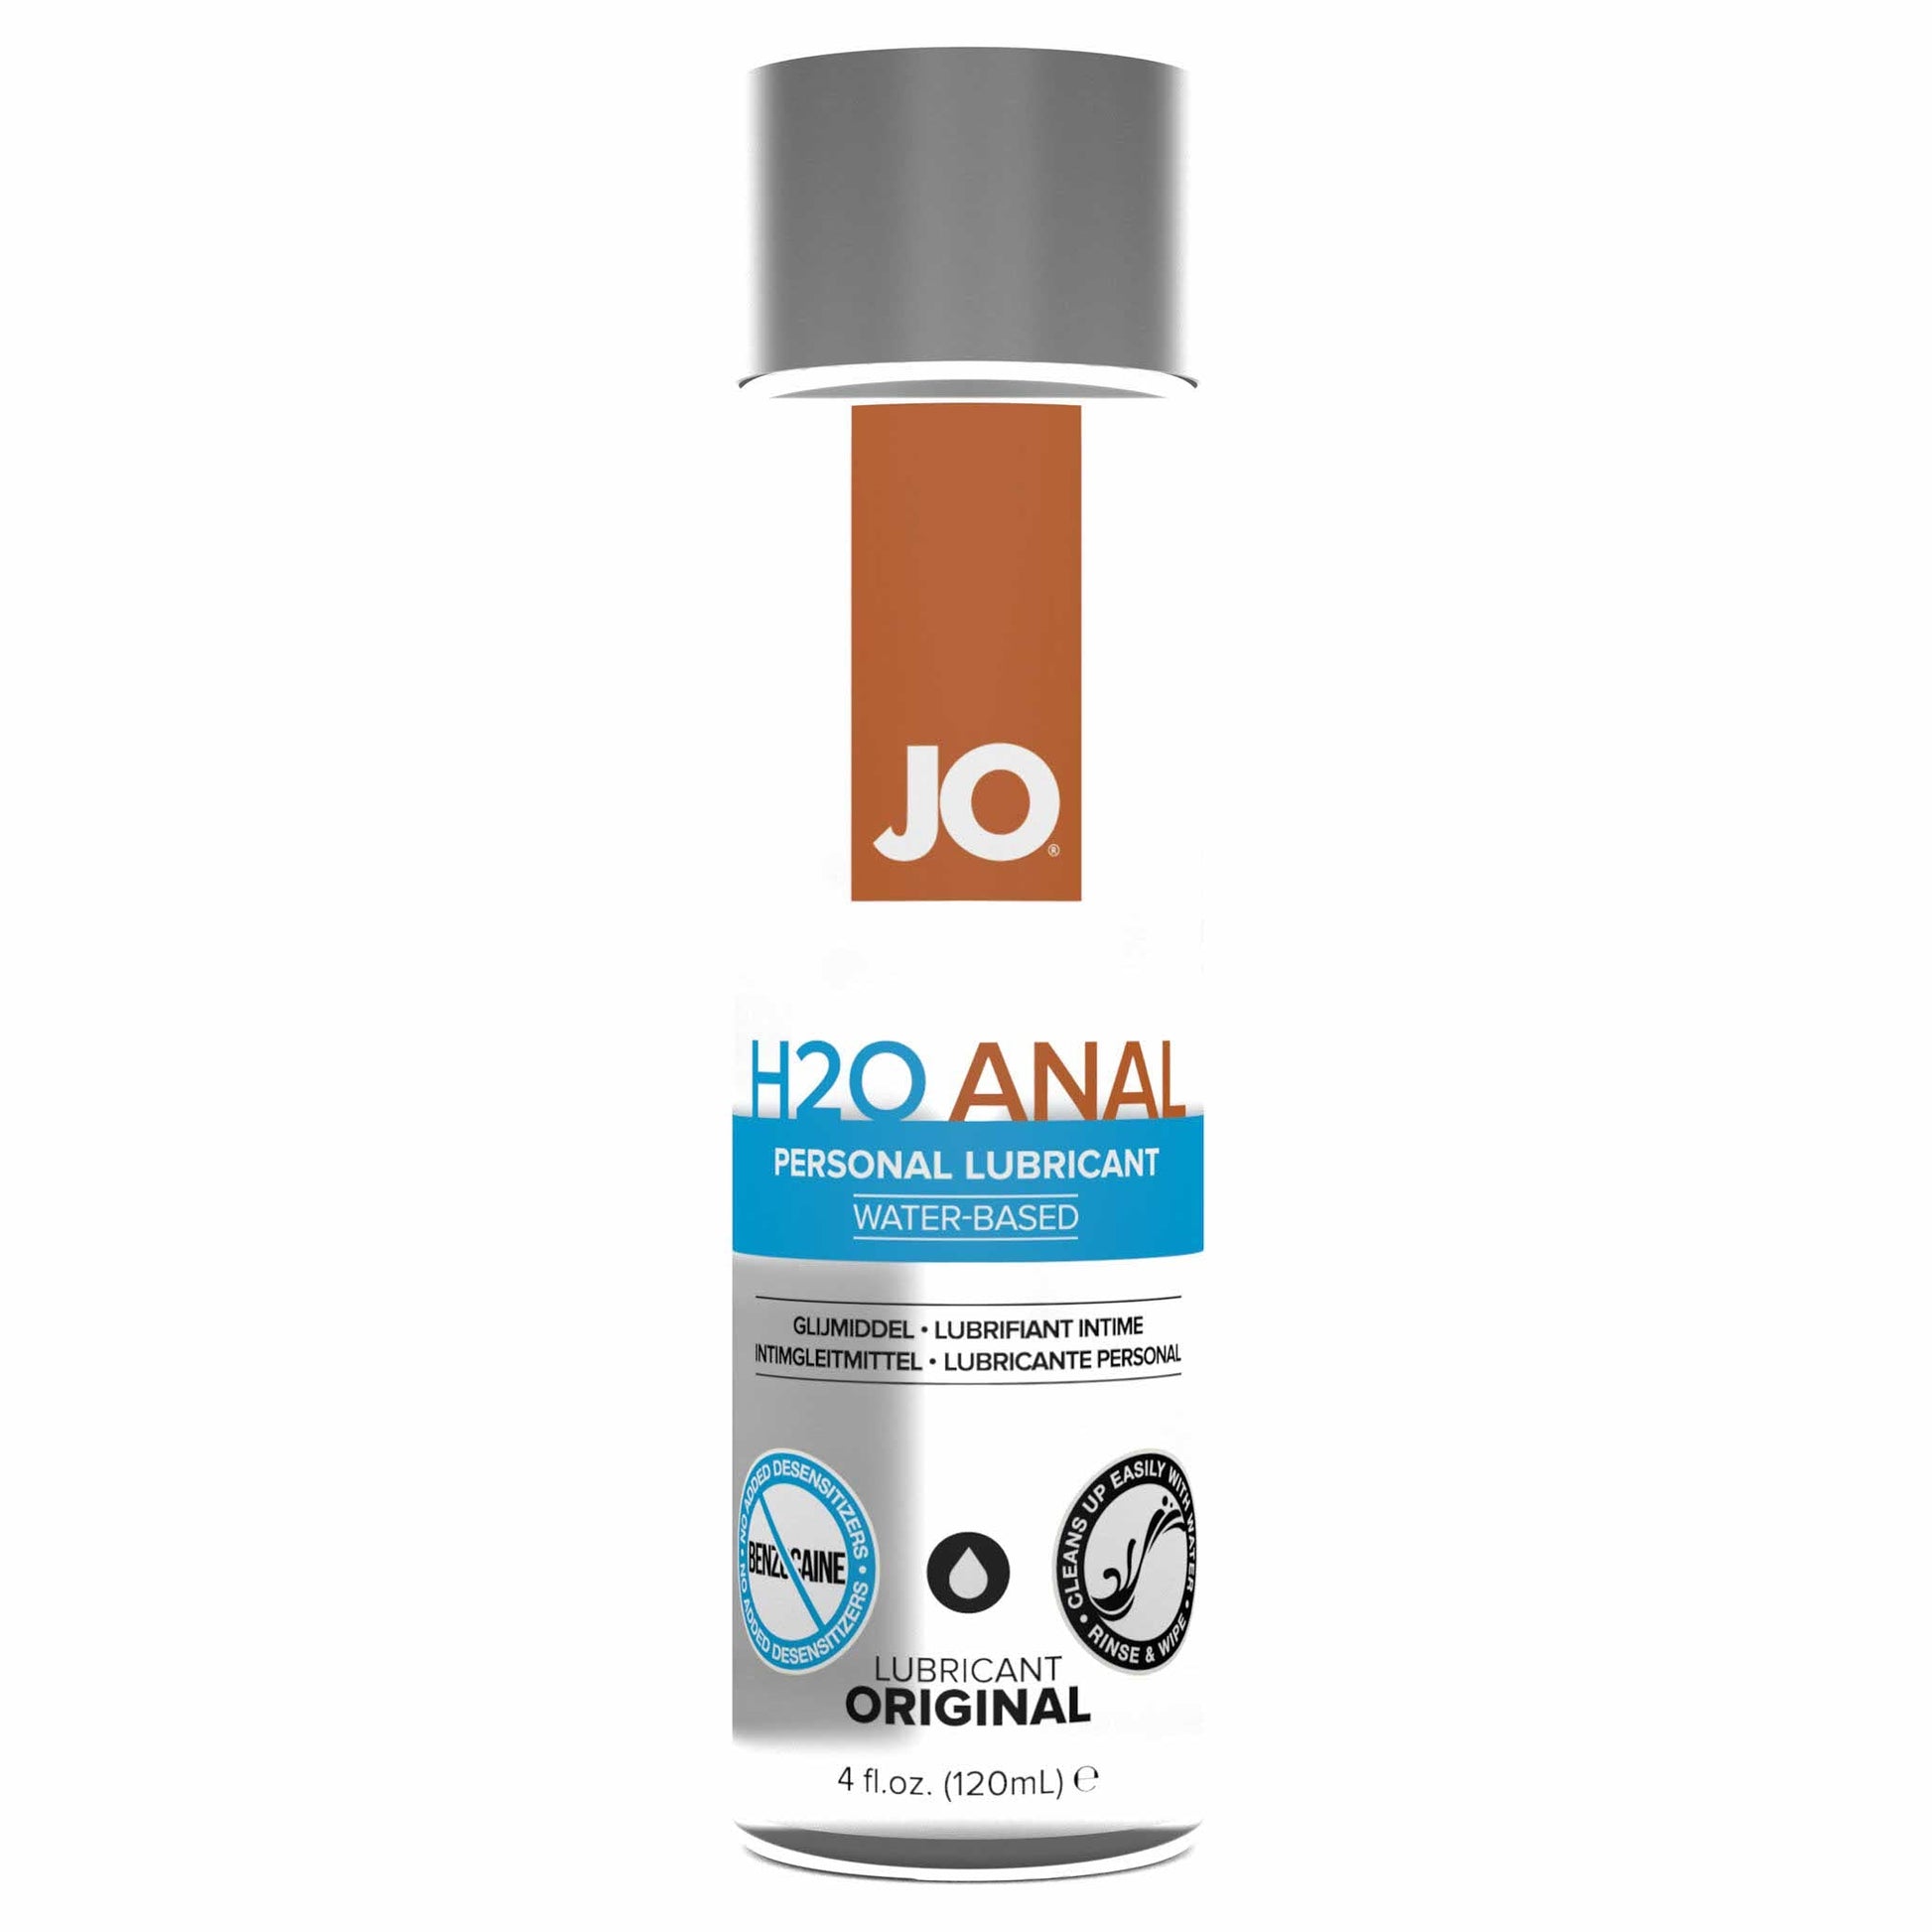 front view of the jo h2o anal water-based personal lubricant original 4oz